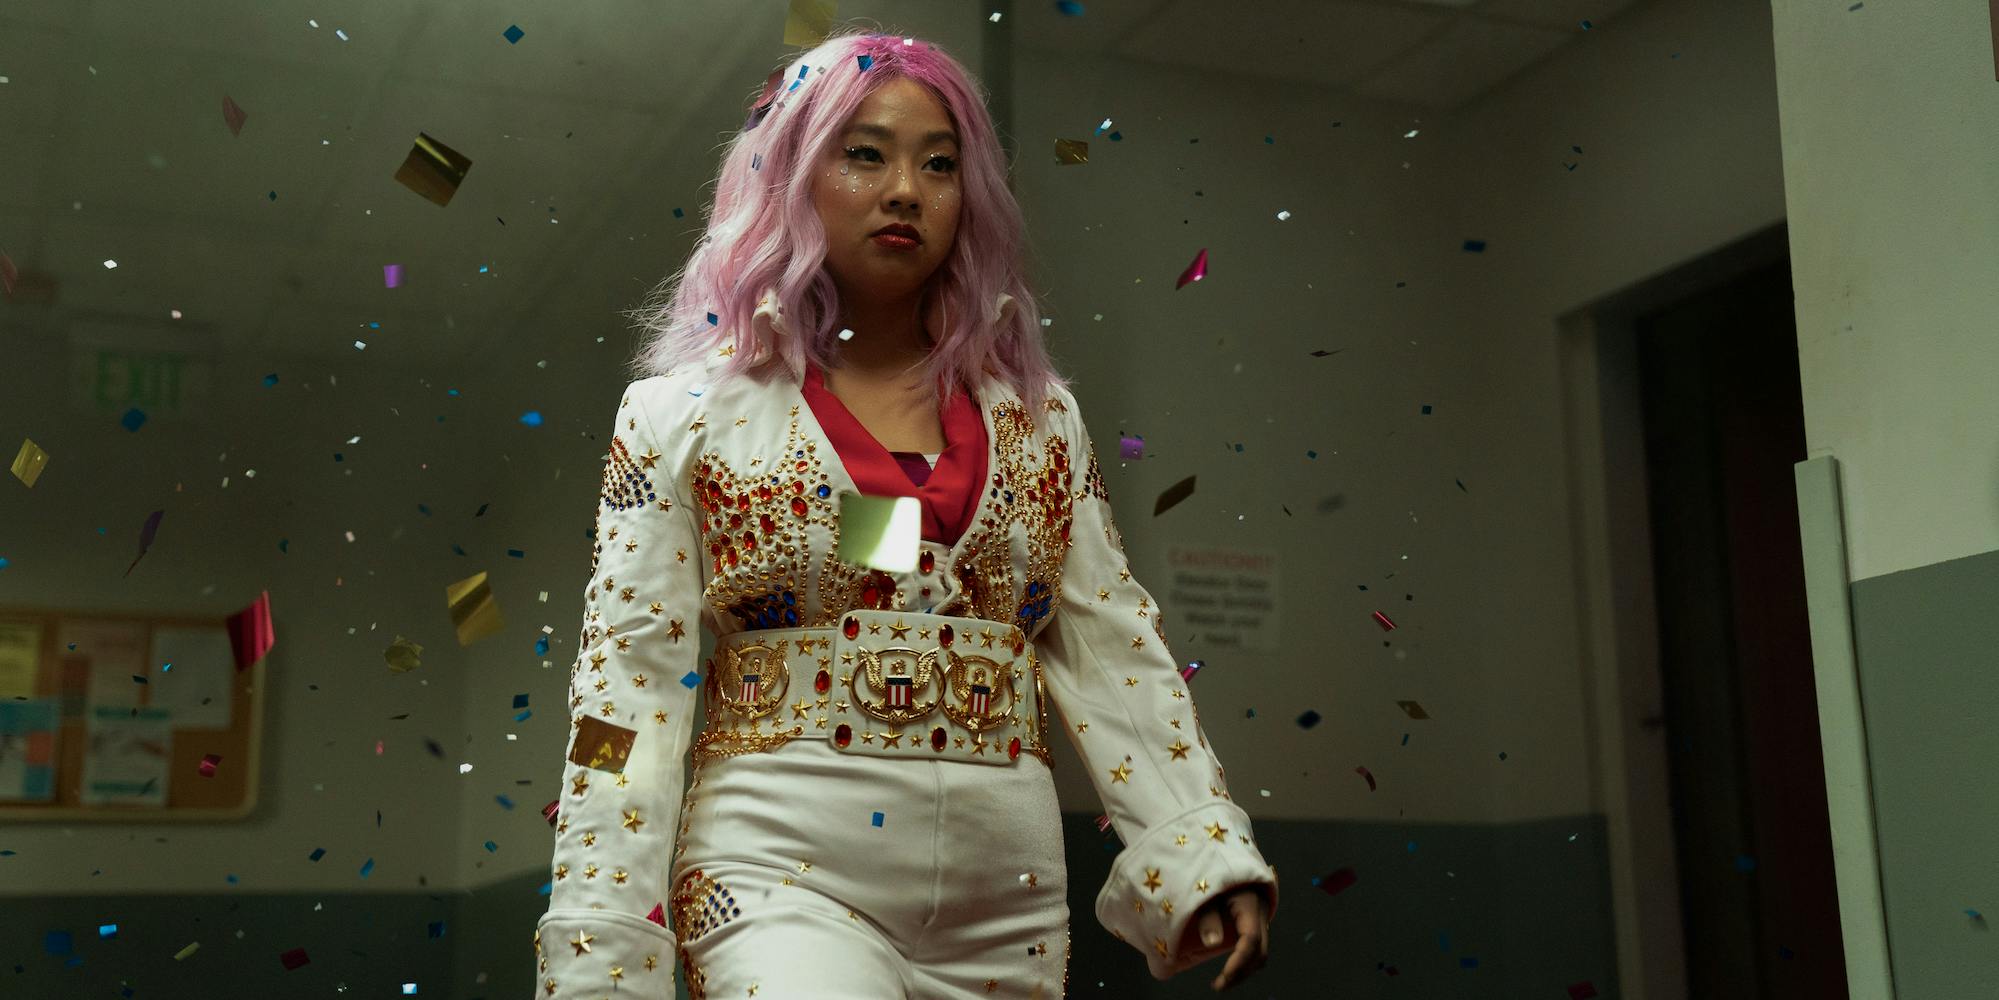 Stephanie Hsu dressed in a white suit decorated with stars and a belt, wearing a pink wig.